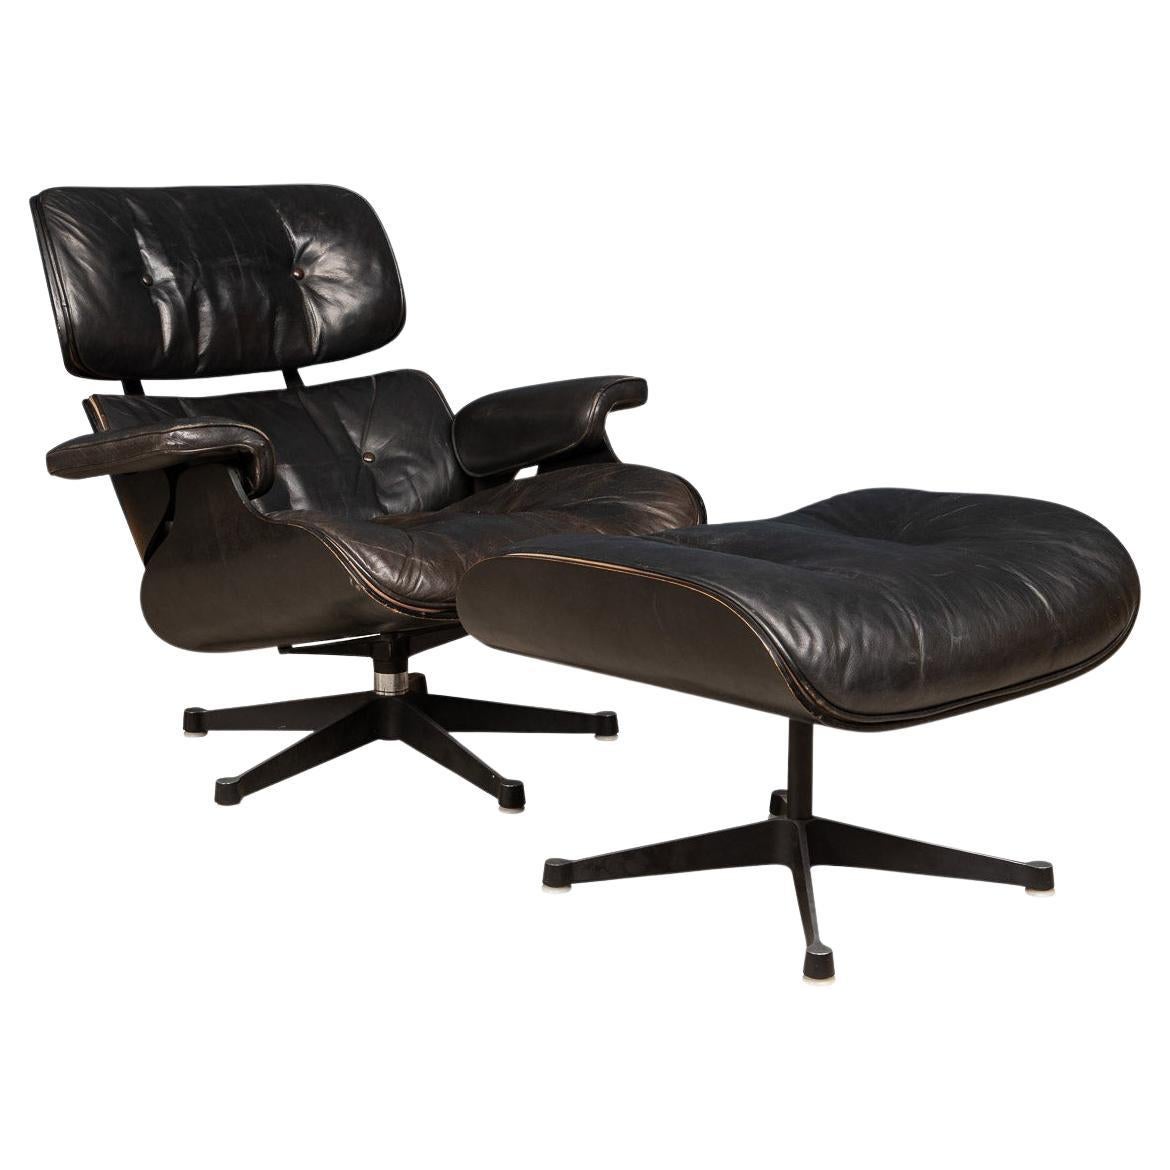 20th Century Black Eames Leather Lounge Chair & Ottoman by Vitra, c.1980